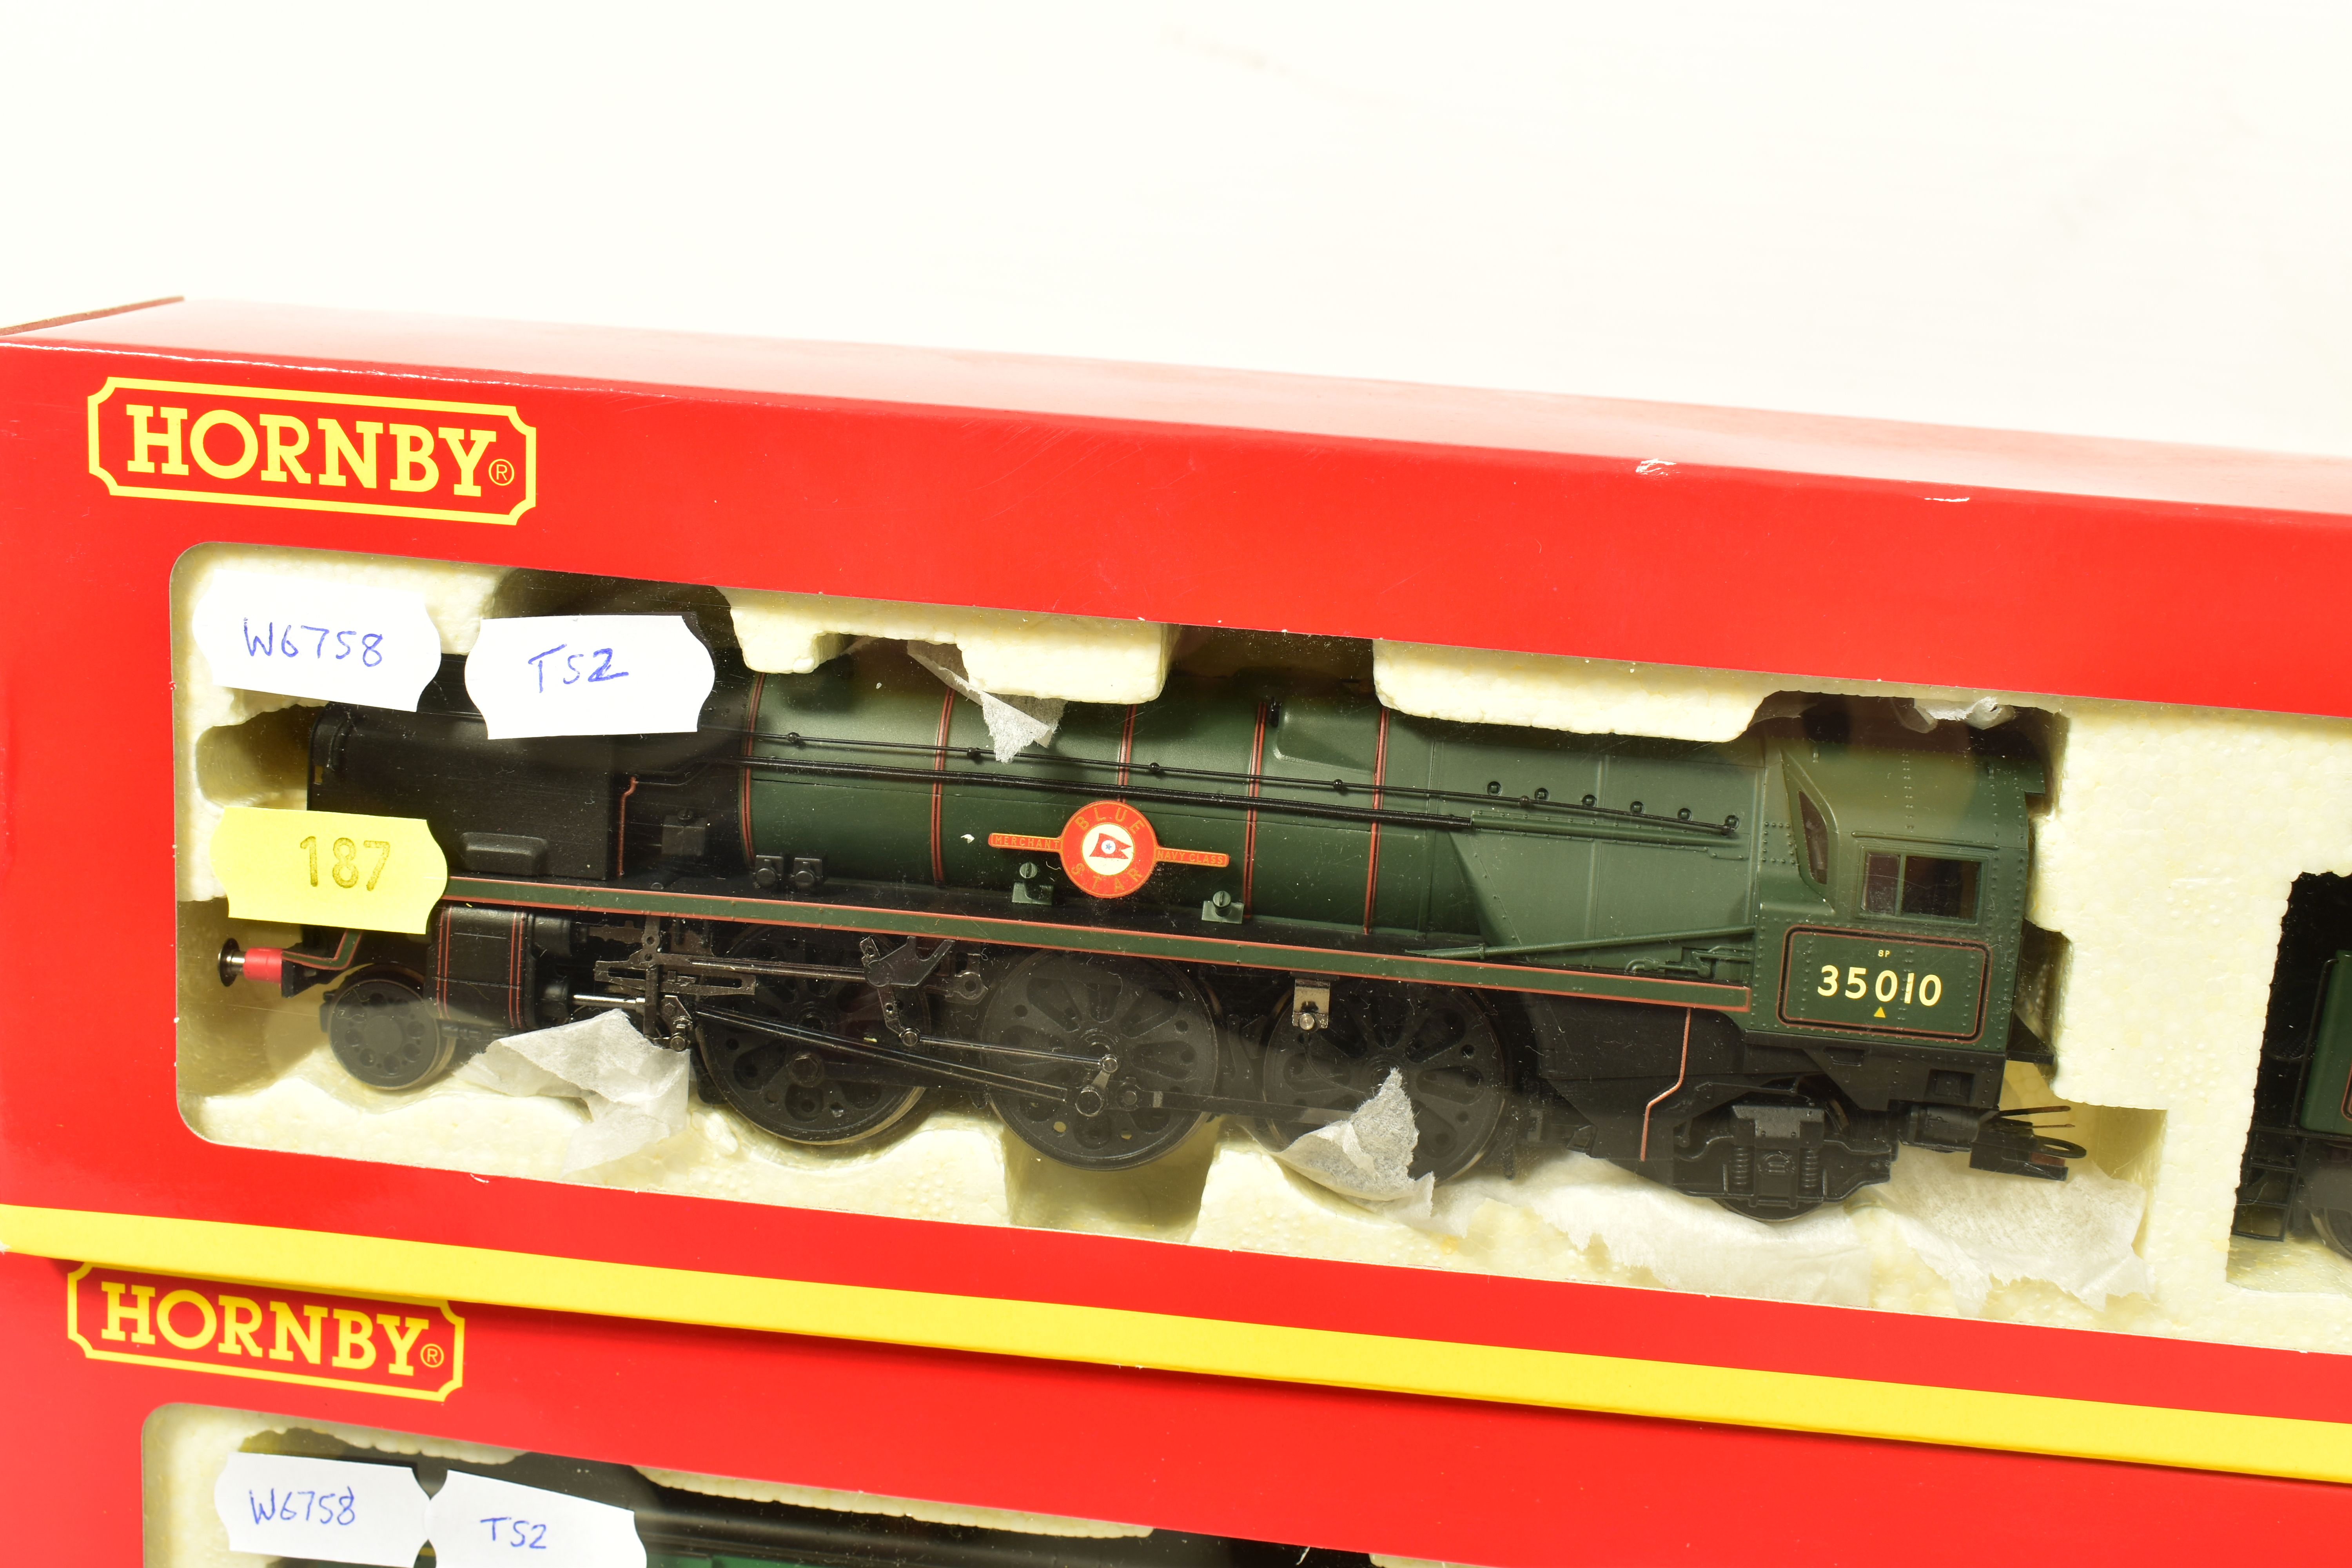 THREE BOXED HORNBY RAILWAYS OO GAUGE LOCOMOTIVES, limited edition West Country class 'Bude' No. - Image 2 of 12